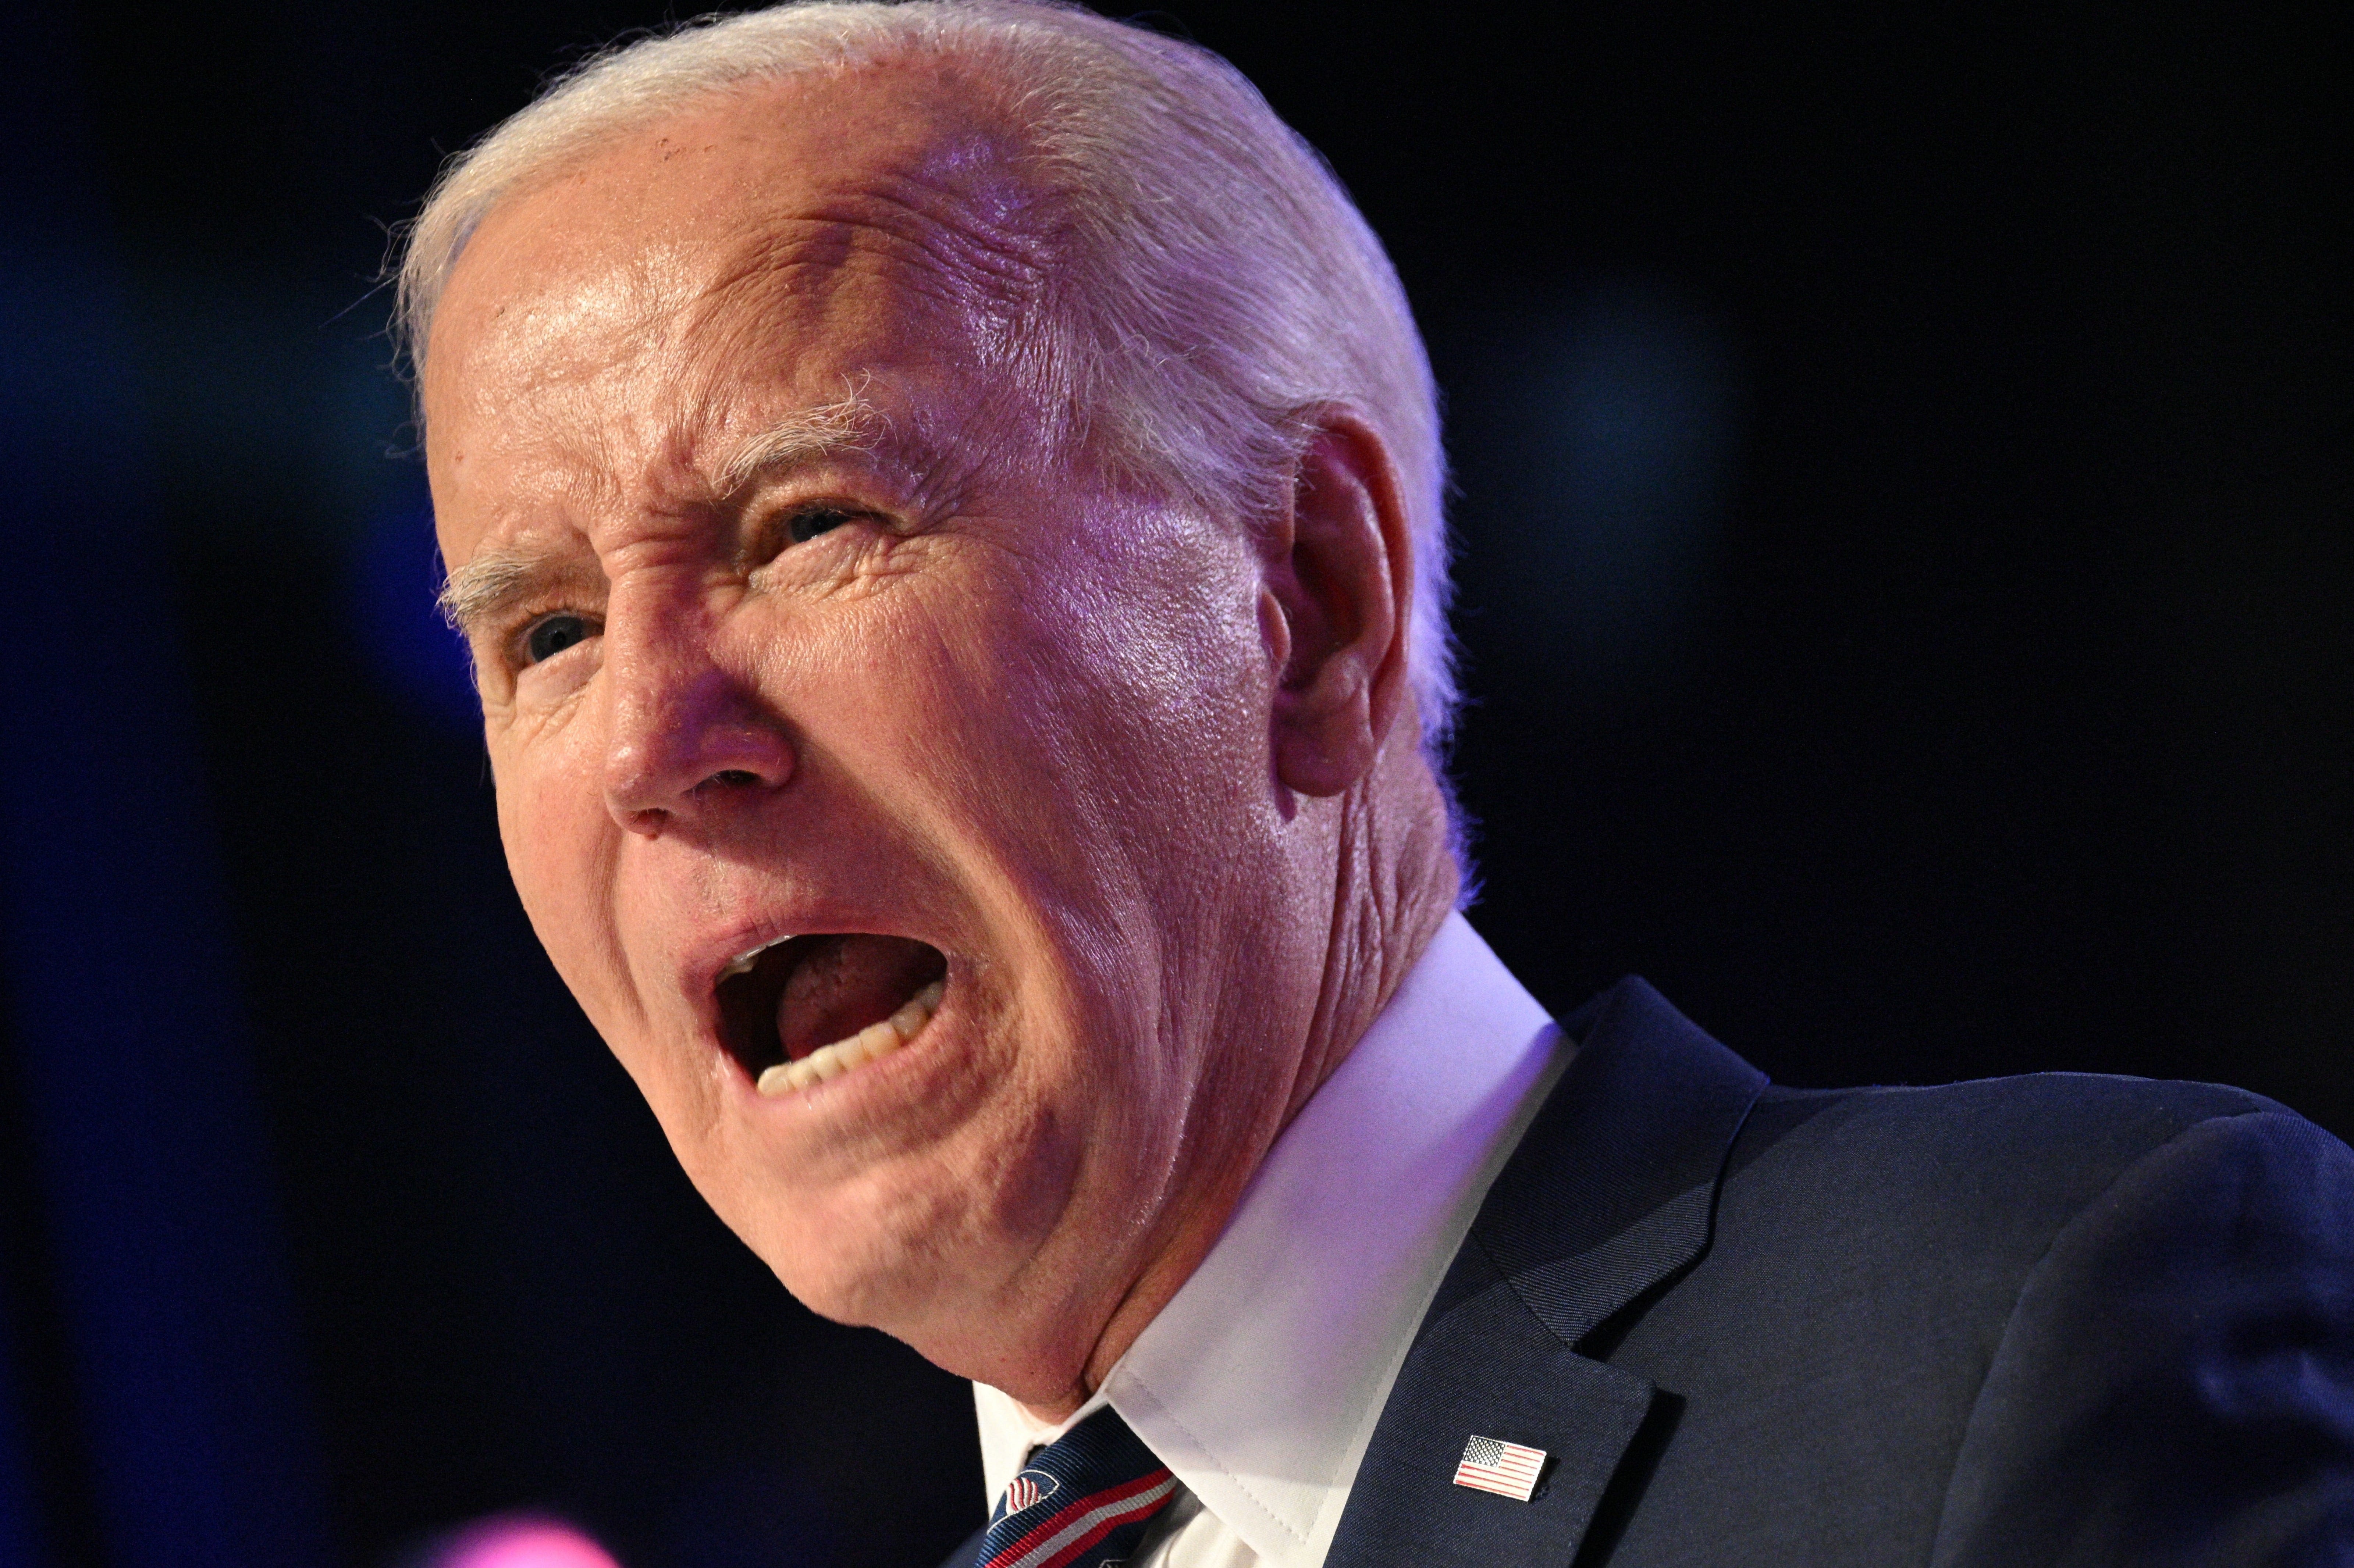 Biden gets his wish to debate Trump. But it’s not going to be the win he thinks it is.